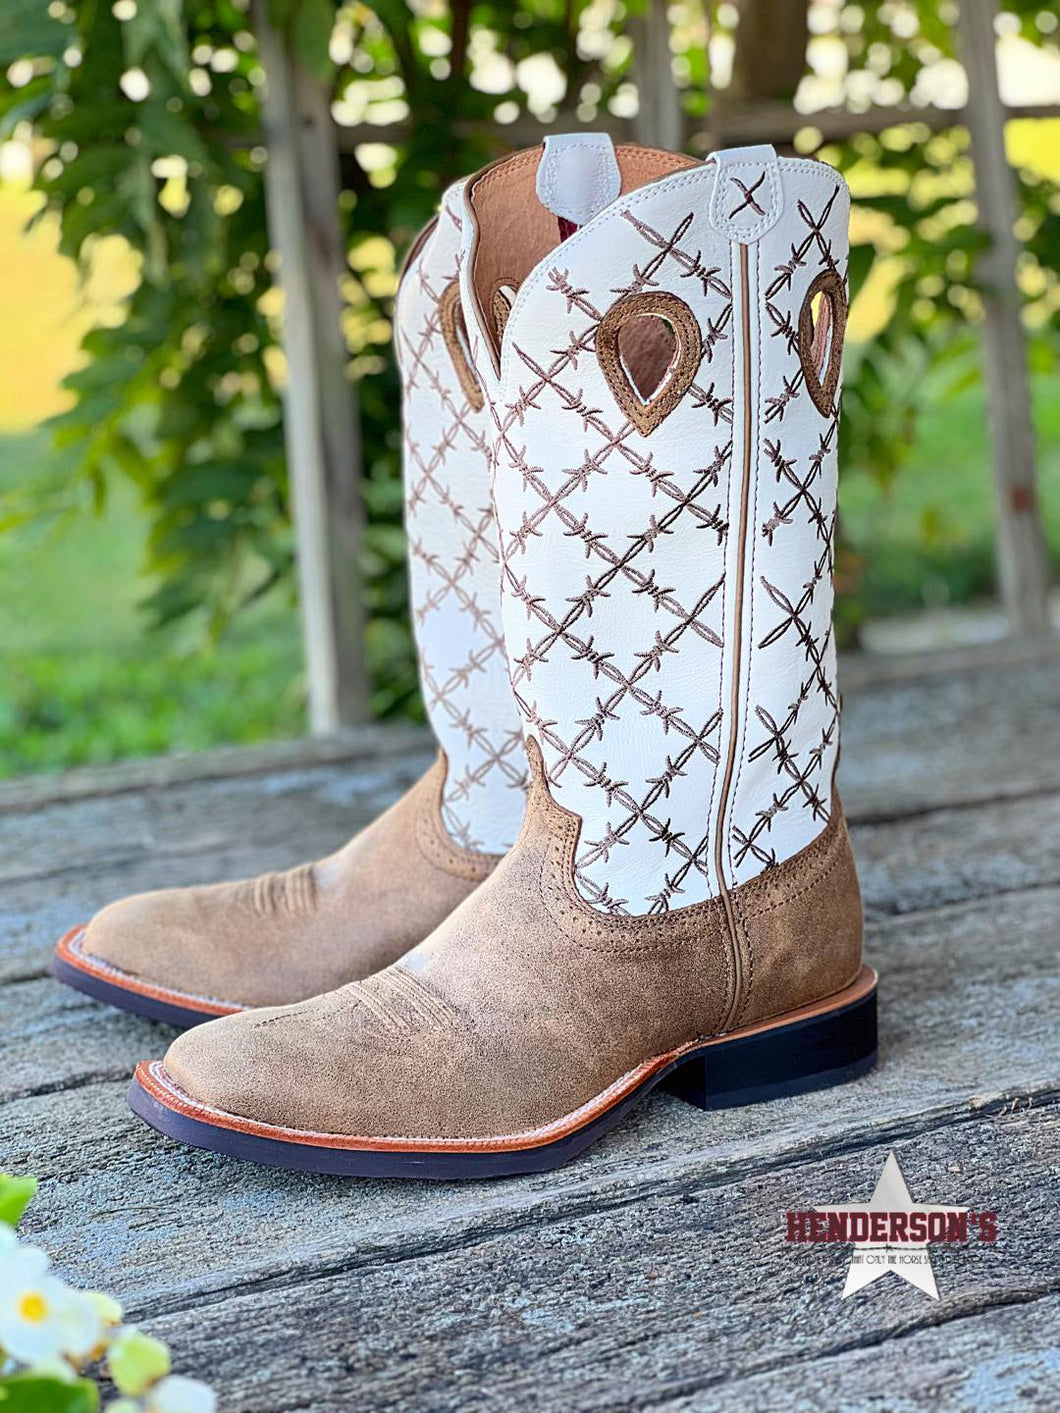 Western Ruff Stock Boot by Twisted X - Henderson's Western Store